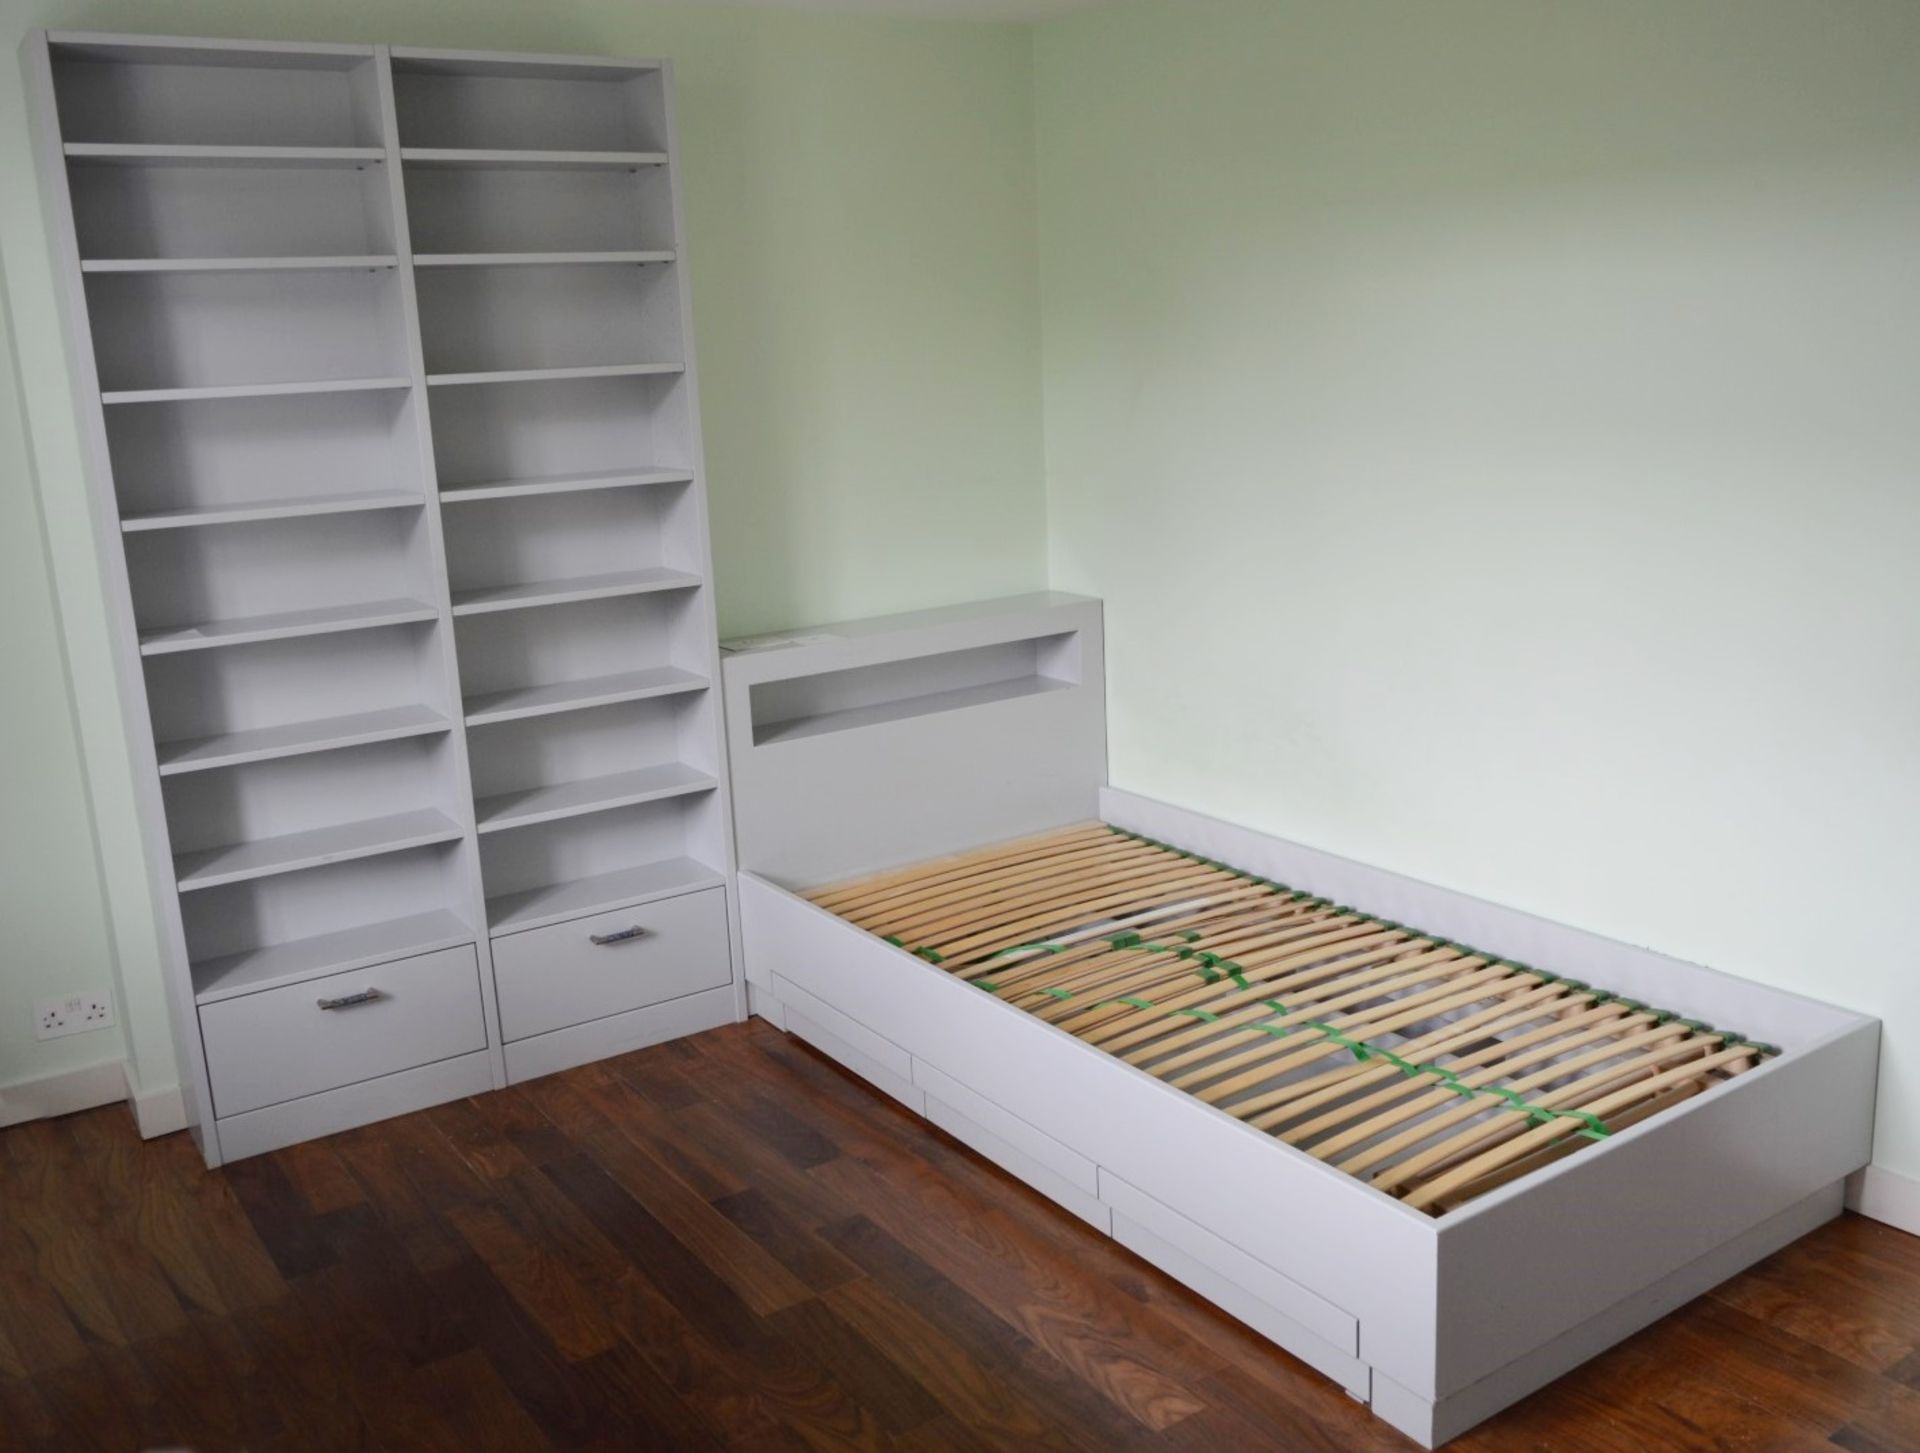 1 x Bedroom Suite Including Single Bed With Schulter Komfortzone Slatted Base and Textiles Vertrauen